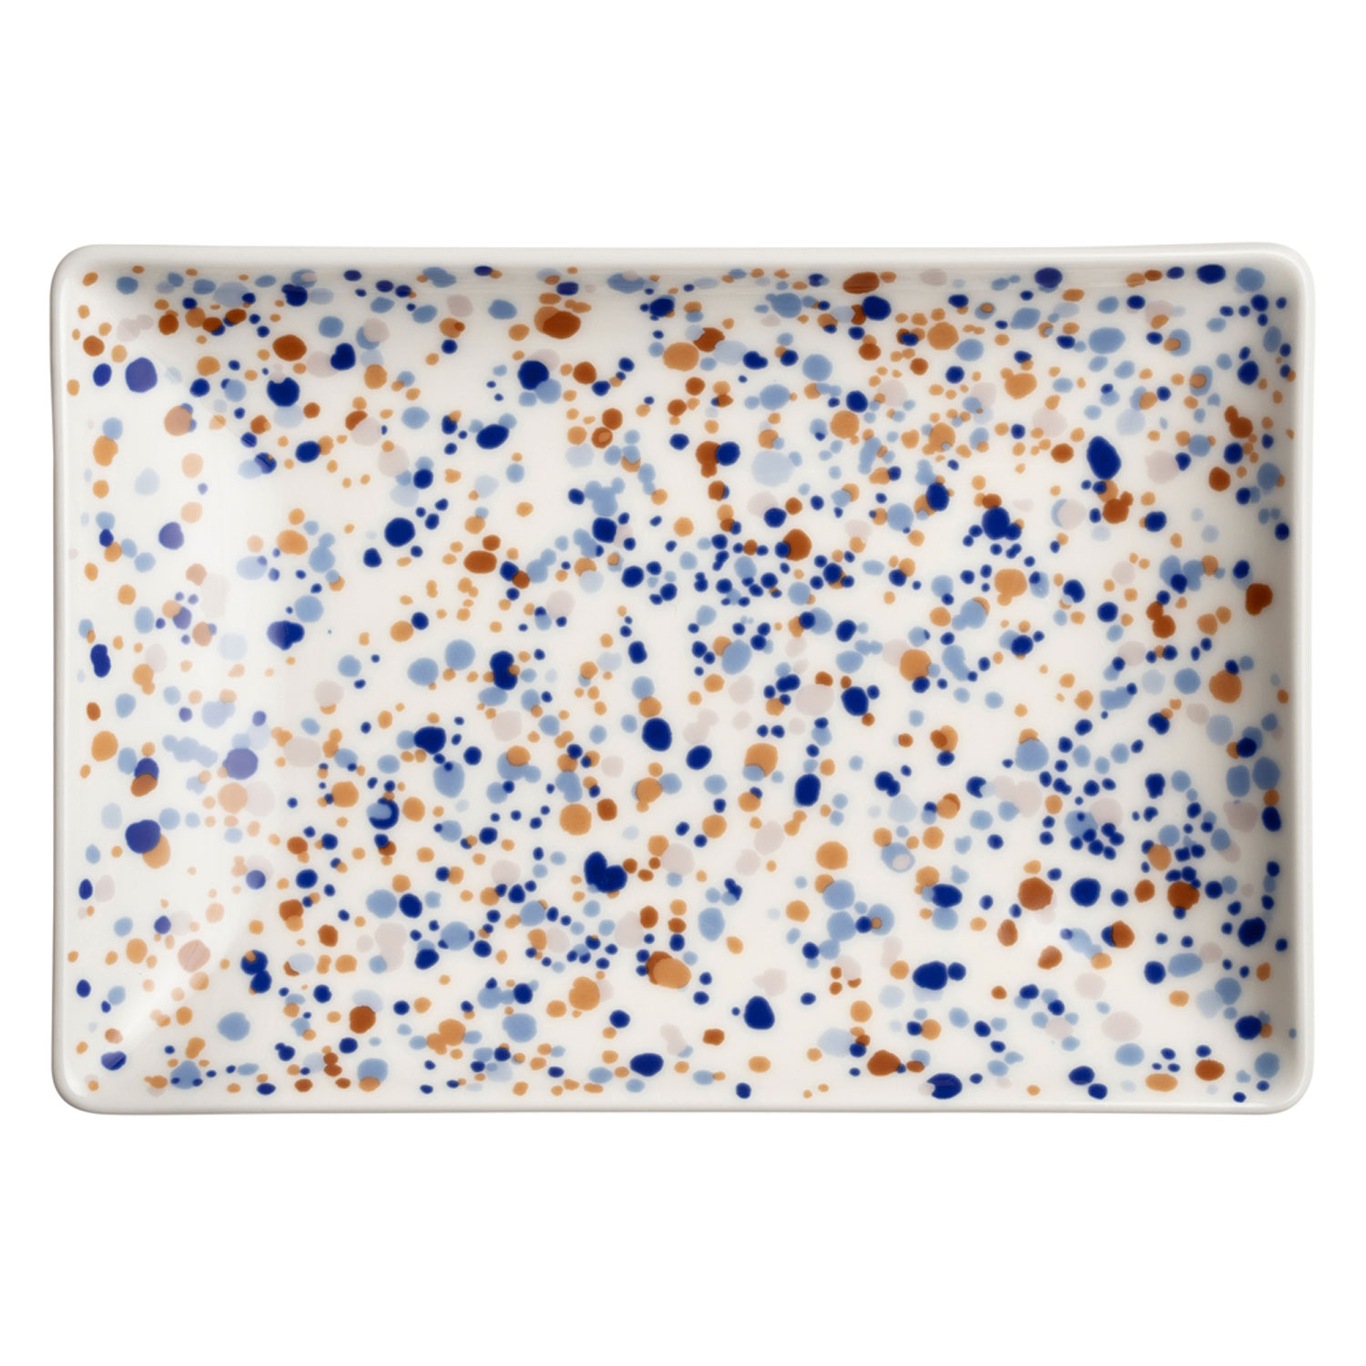 Oiva Toikka Collection Helle Plate Blue / Brown, A5 15x21 cm